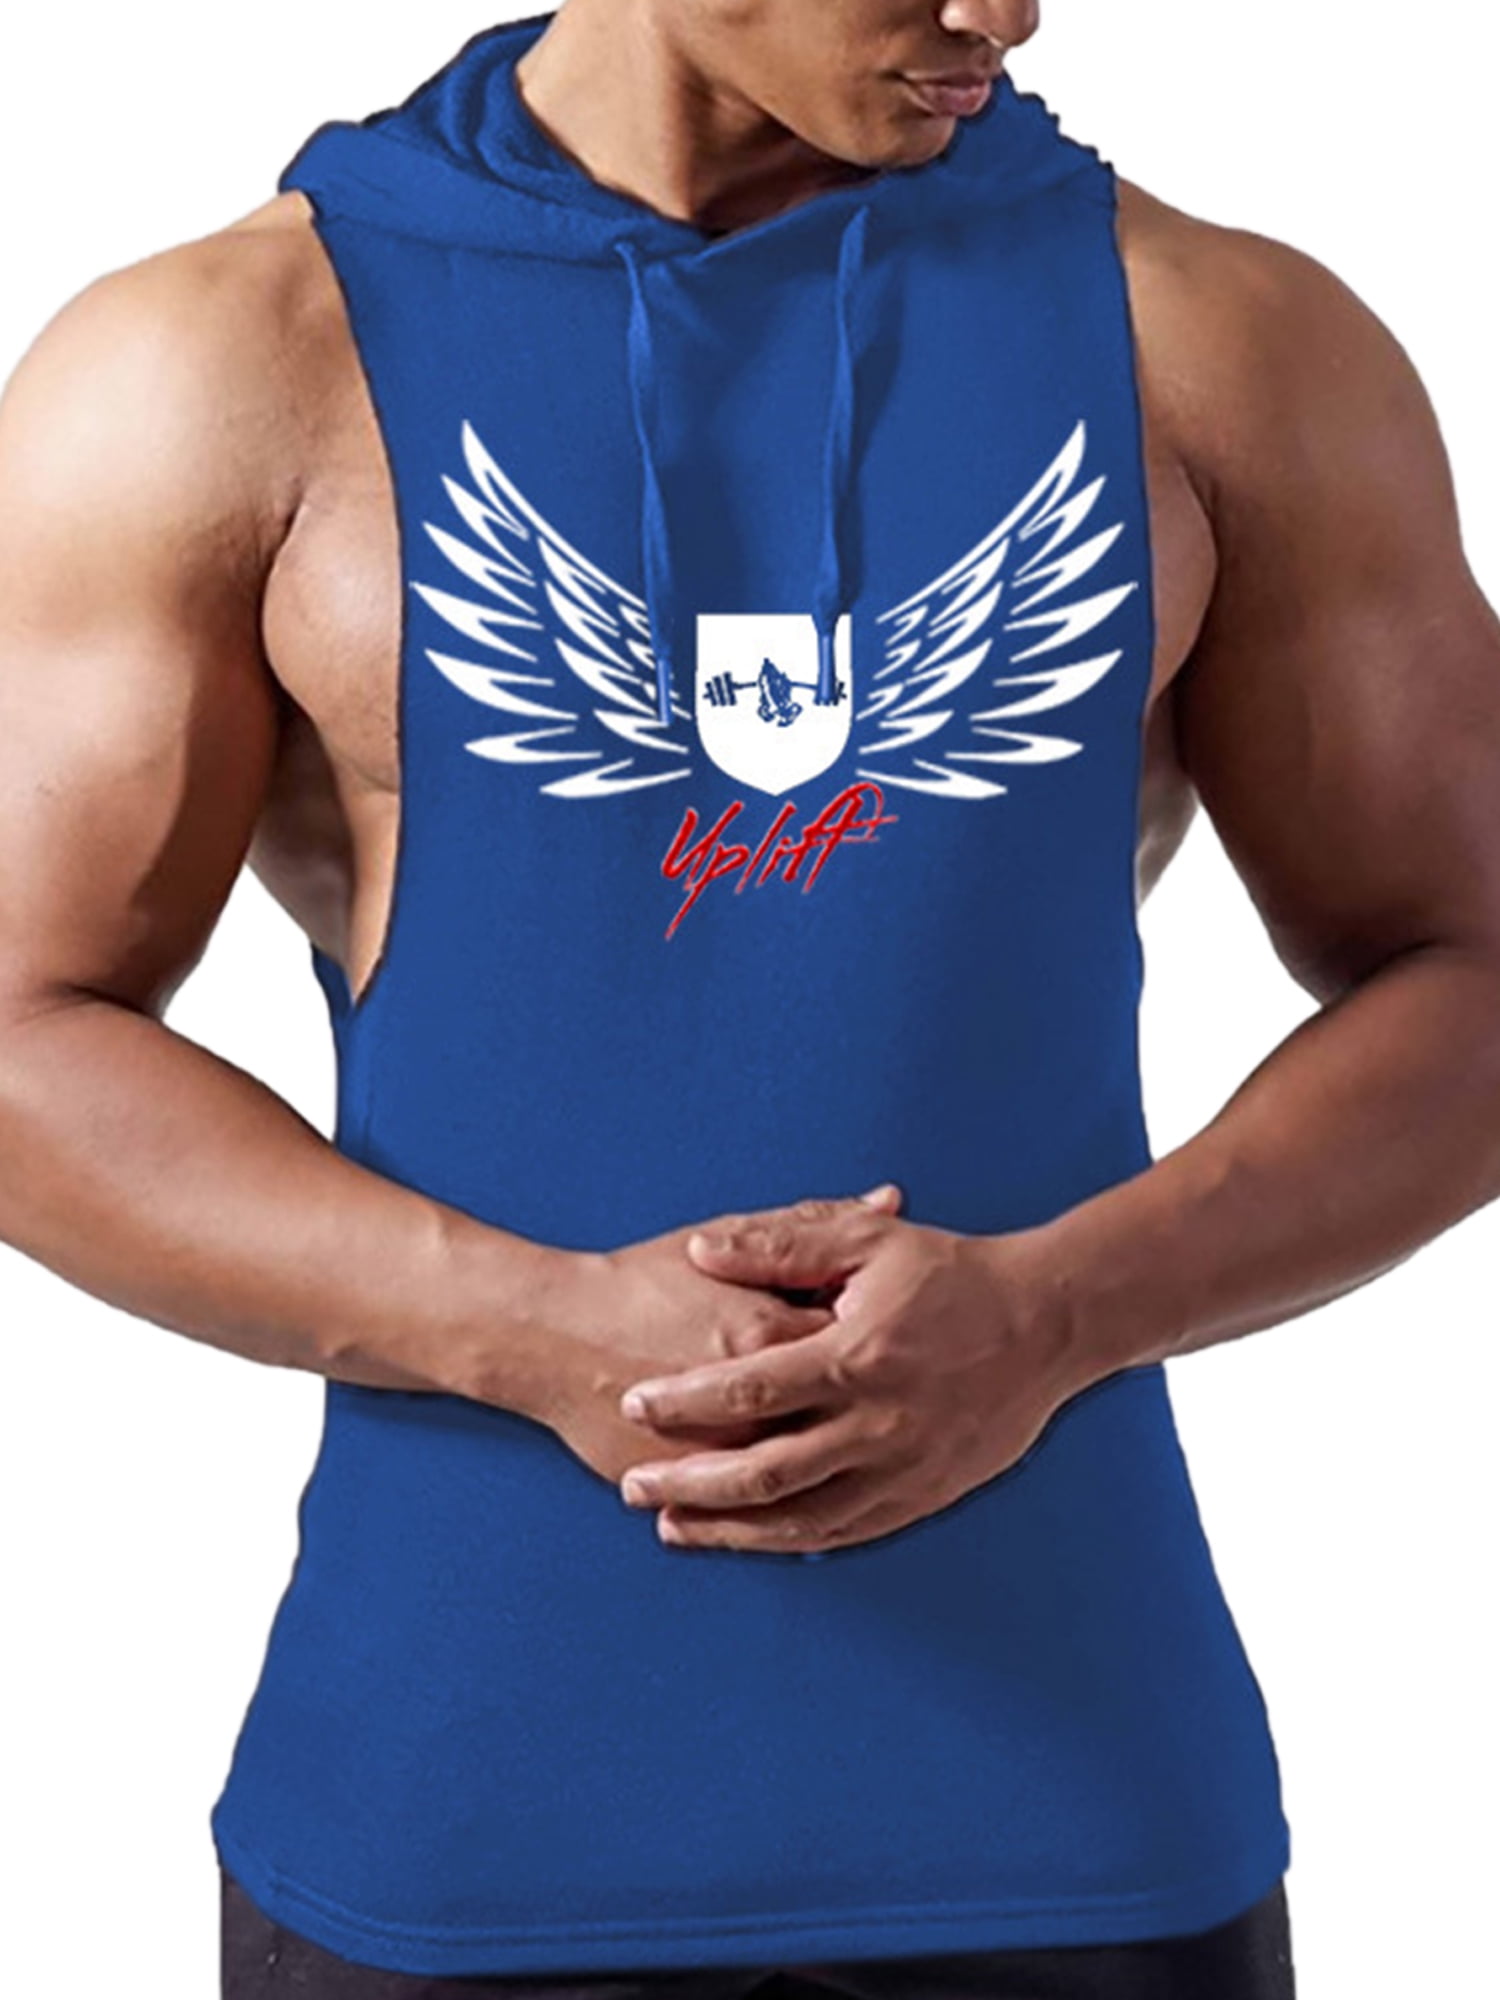 Details about   Gyms Hoodies Tank Top Mens Bodybuilding Vest sleeveless Fitness Clothing Cotton